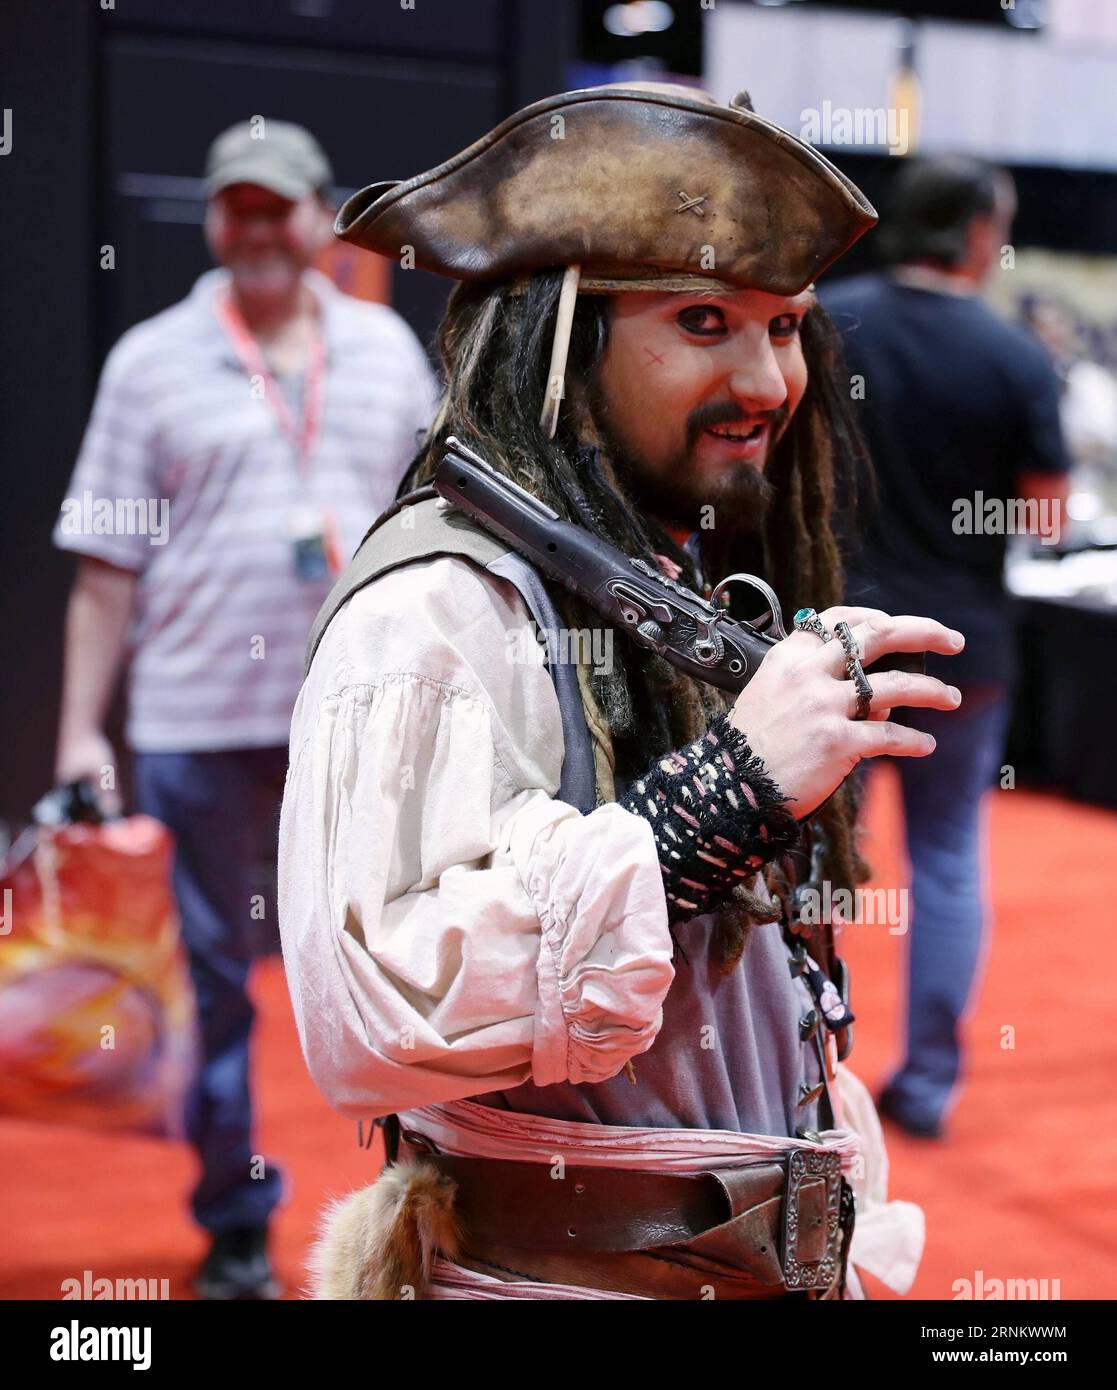 (170422) -- CHICAGO, April 22, 2017 -- A cosplayer dressed in Captain Jack Sparrow s costume poses for pictures during the Chicago Comic and Entertainment Expo (C2E2) in Chicago, the United States, April 21, 2017. The C2E2 kicked off in Chicago on April 21 and will last for three days. ) (zxj) U.S.-CHICAGO-COMIC AND ENTERTAINMENT EXPO WangxPing PUBLICATIONxNOTxINxCHN   Chicago April 22 2017 a Cosplayer Dressed in Captain Jack Sparrow S costume Poses for Pictures during The Chicago Comic and Entertainment EXPO C2E2 in Chicago The United States April 21 2017 The C2E2 kicked off in Chicago ON Apr Stock Photo